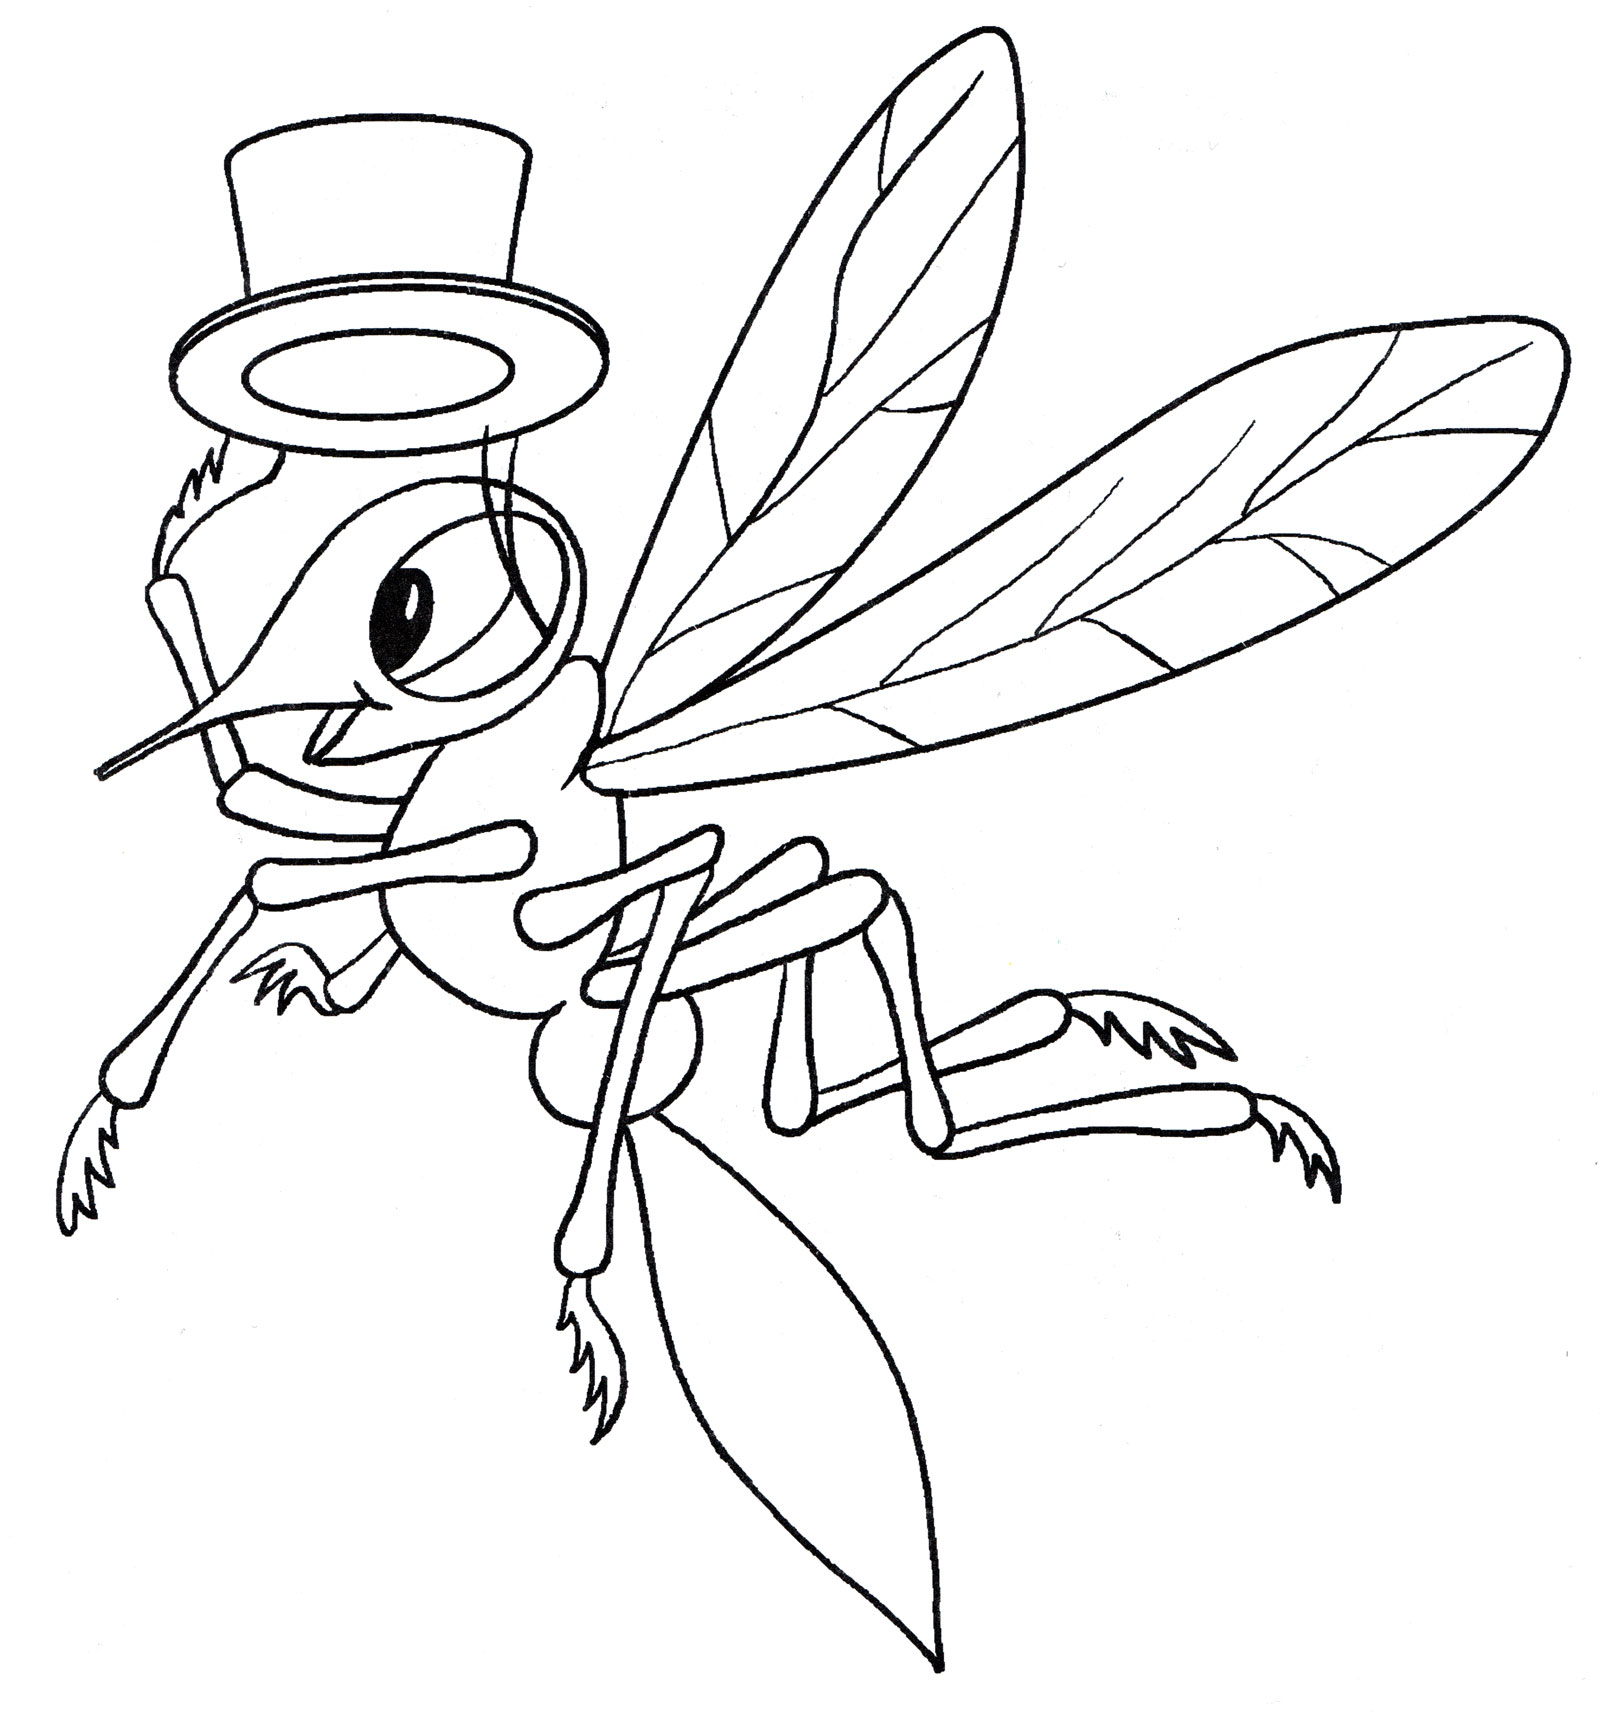 Mosquito in a hat